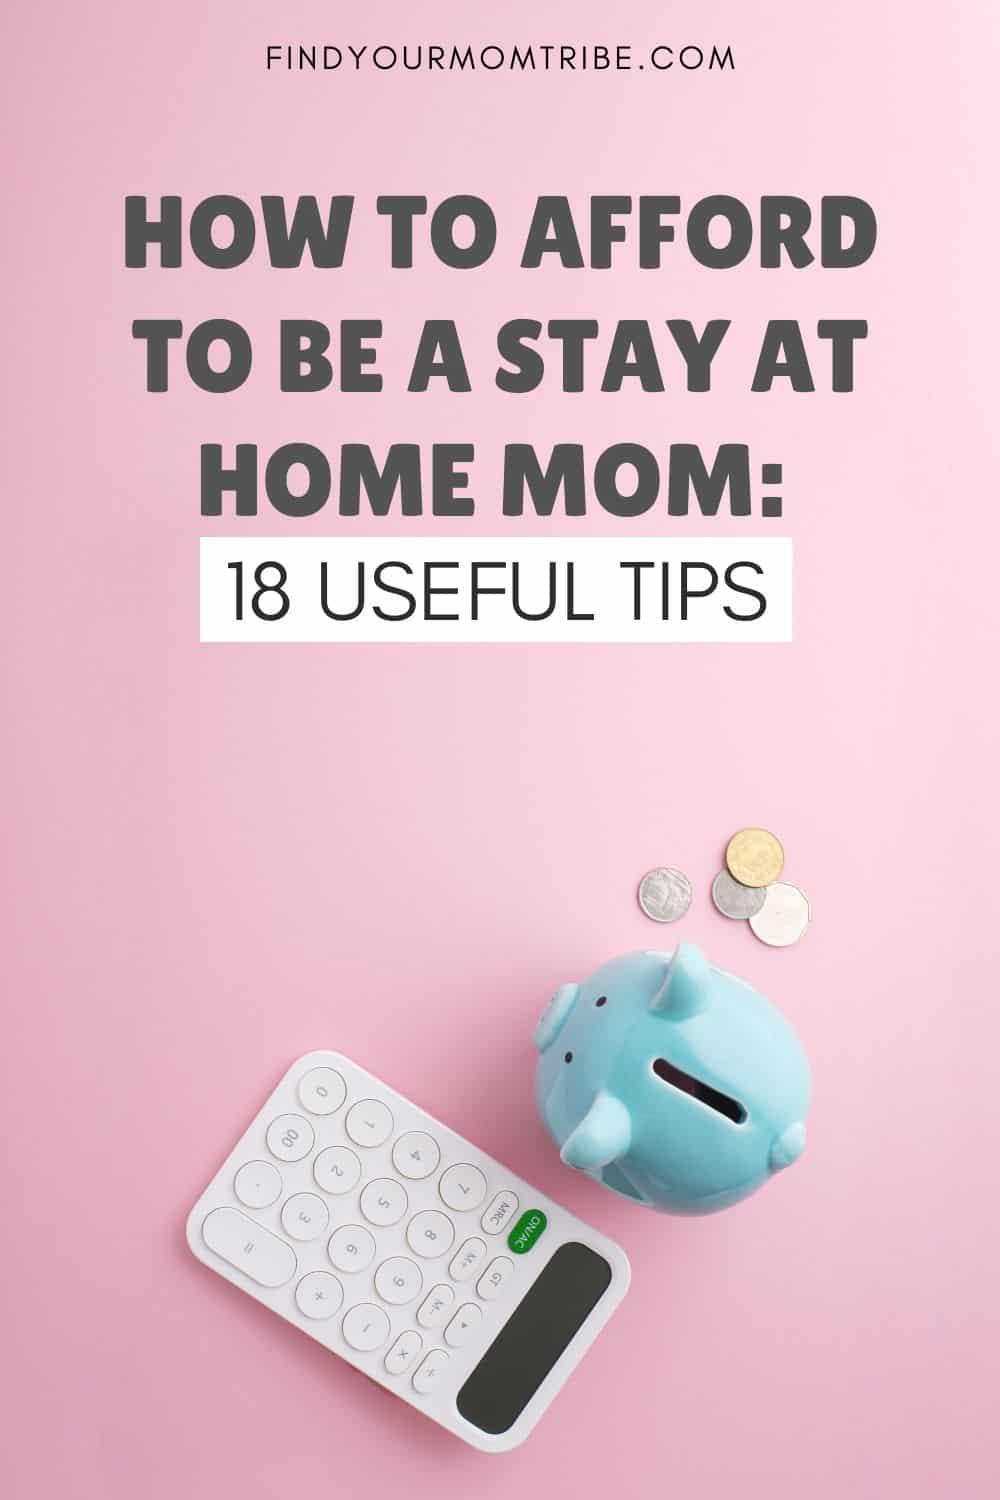 How To Afford To Be A Stay At Home Mom Pinterest